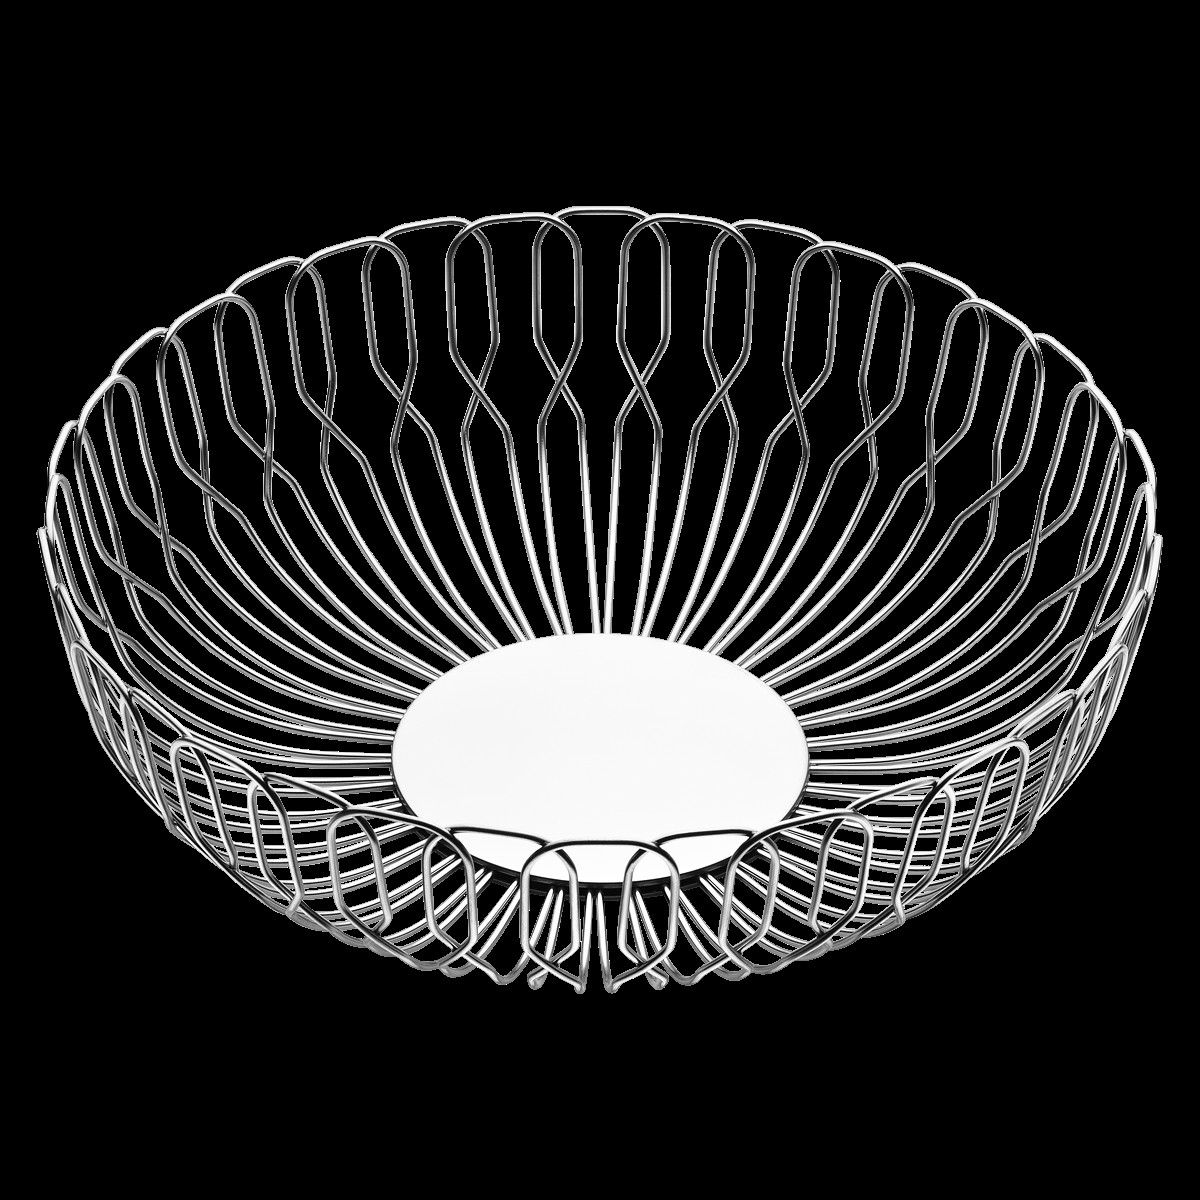 26 Famous Georg Jensen Cafu Vase 2024 free download georg jensen cafu vase of alfredo wire form bread basket in stainless steel georg jensen with pack 3586321 1200 0